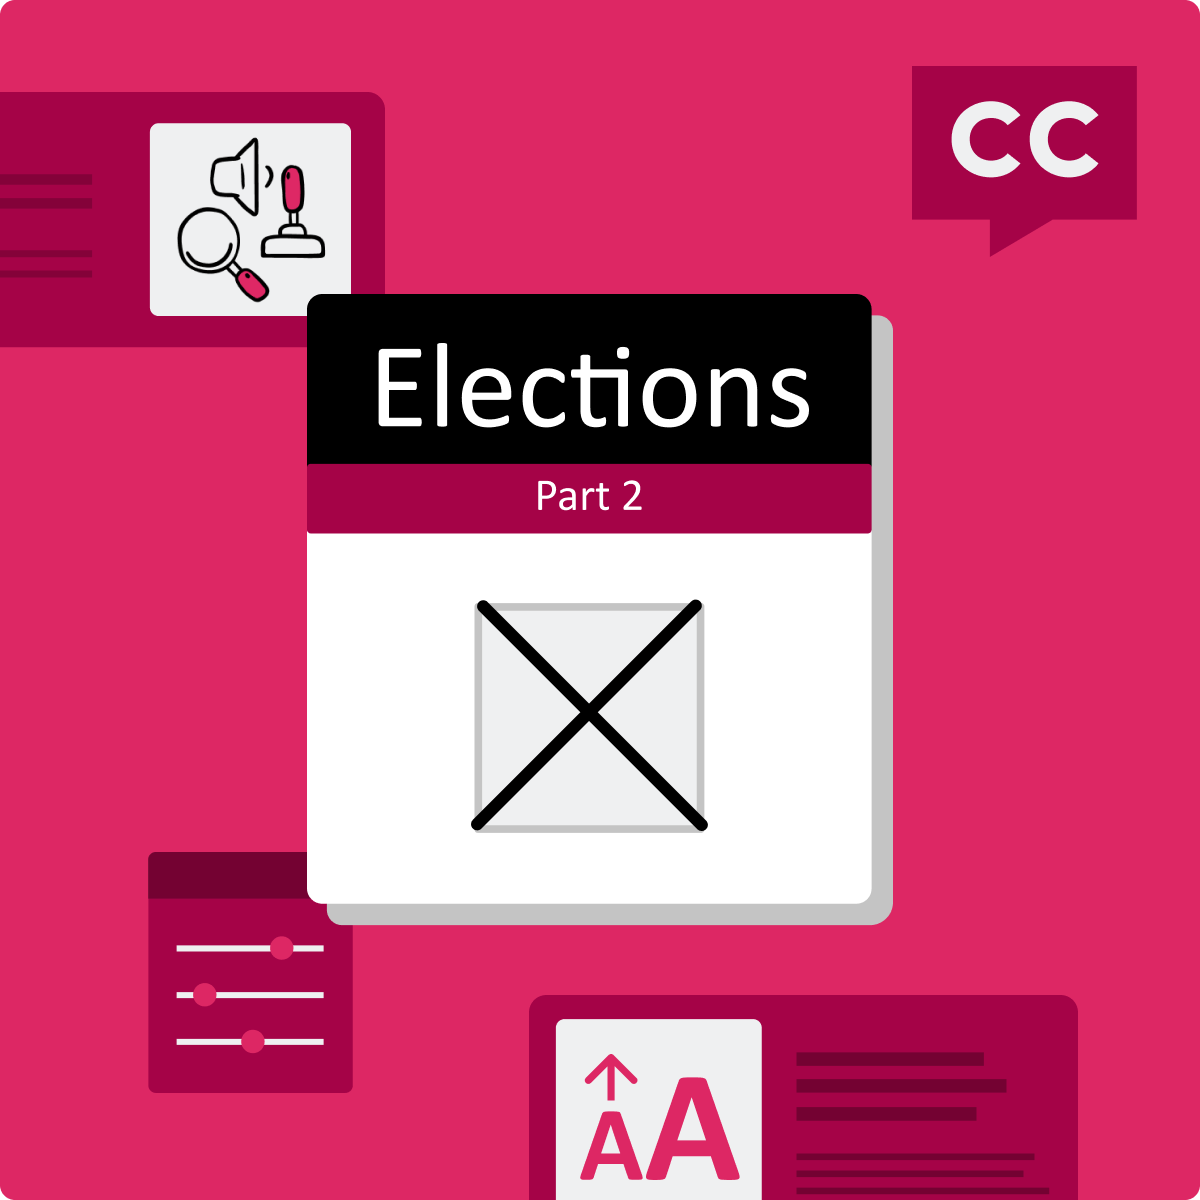 Decorative thumbnail image that says 'Elections Part 2' with illustrations of a checked off ballot checkbox, surrounded by smaller illustrations of accessibility features such as a closed captioning symbol, text resizing, and other assistive technologies